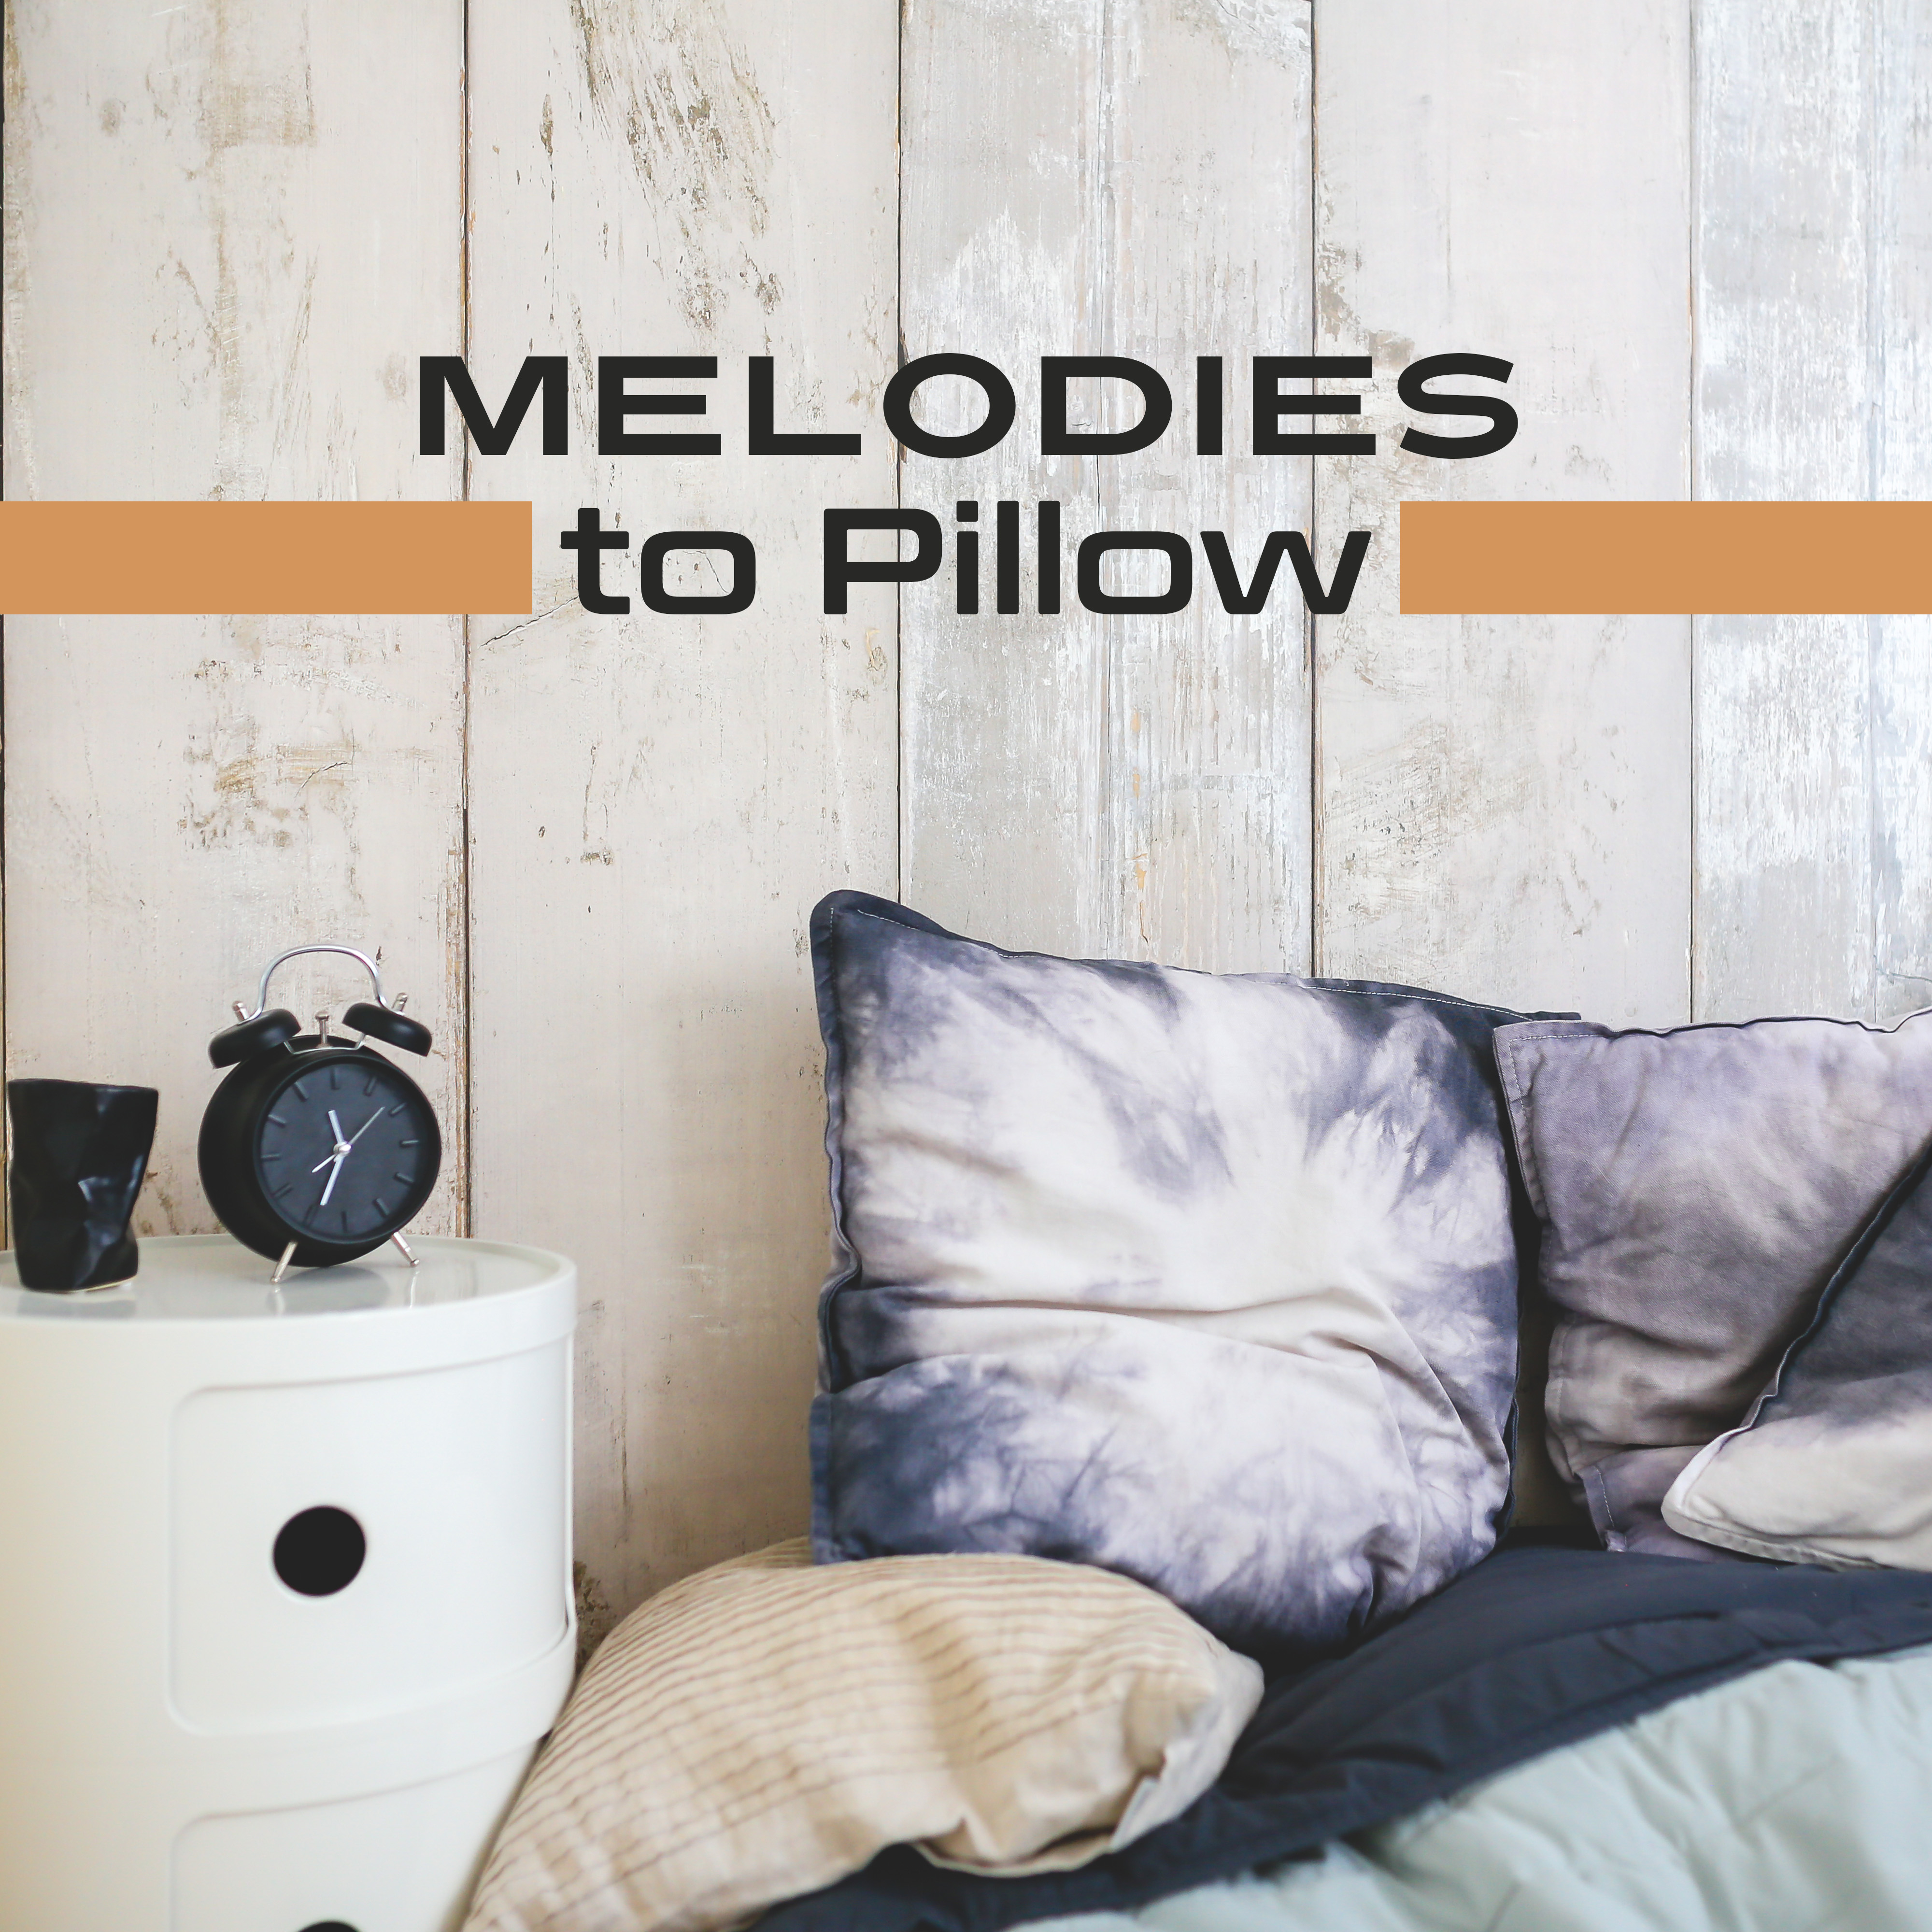 Melodies to Pillow  Soft Music for Sleep, Relaxing Night, Sweet Nap, Calm Sounds at Goodnight, Healing Lullabies to Bed